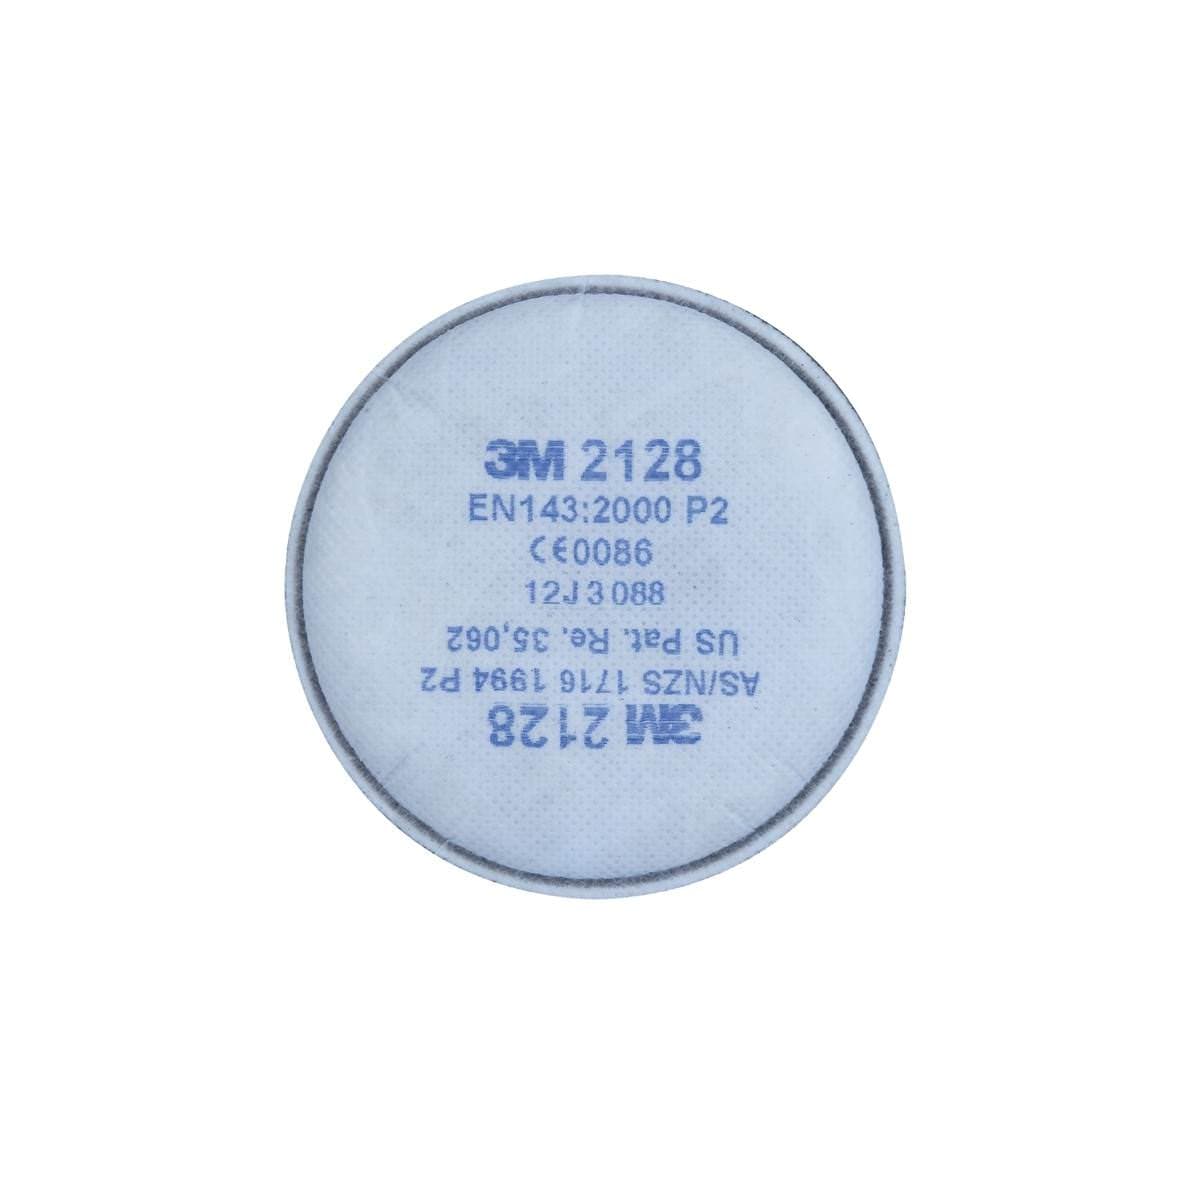 3M™ Particulate Filter 2128, P2, with Nuisance Level Organic Vapor/Acid Gas Relief (Pair)